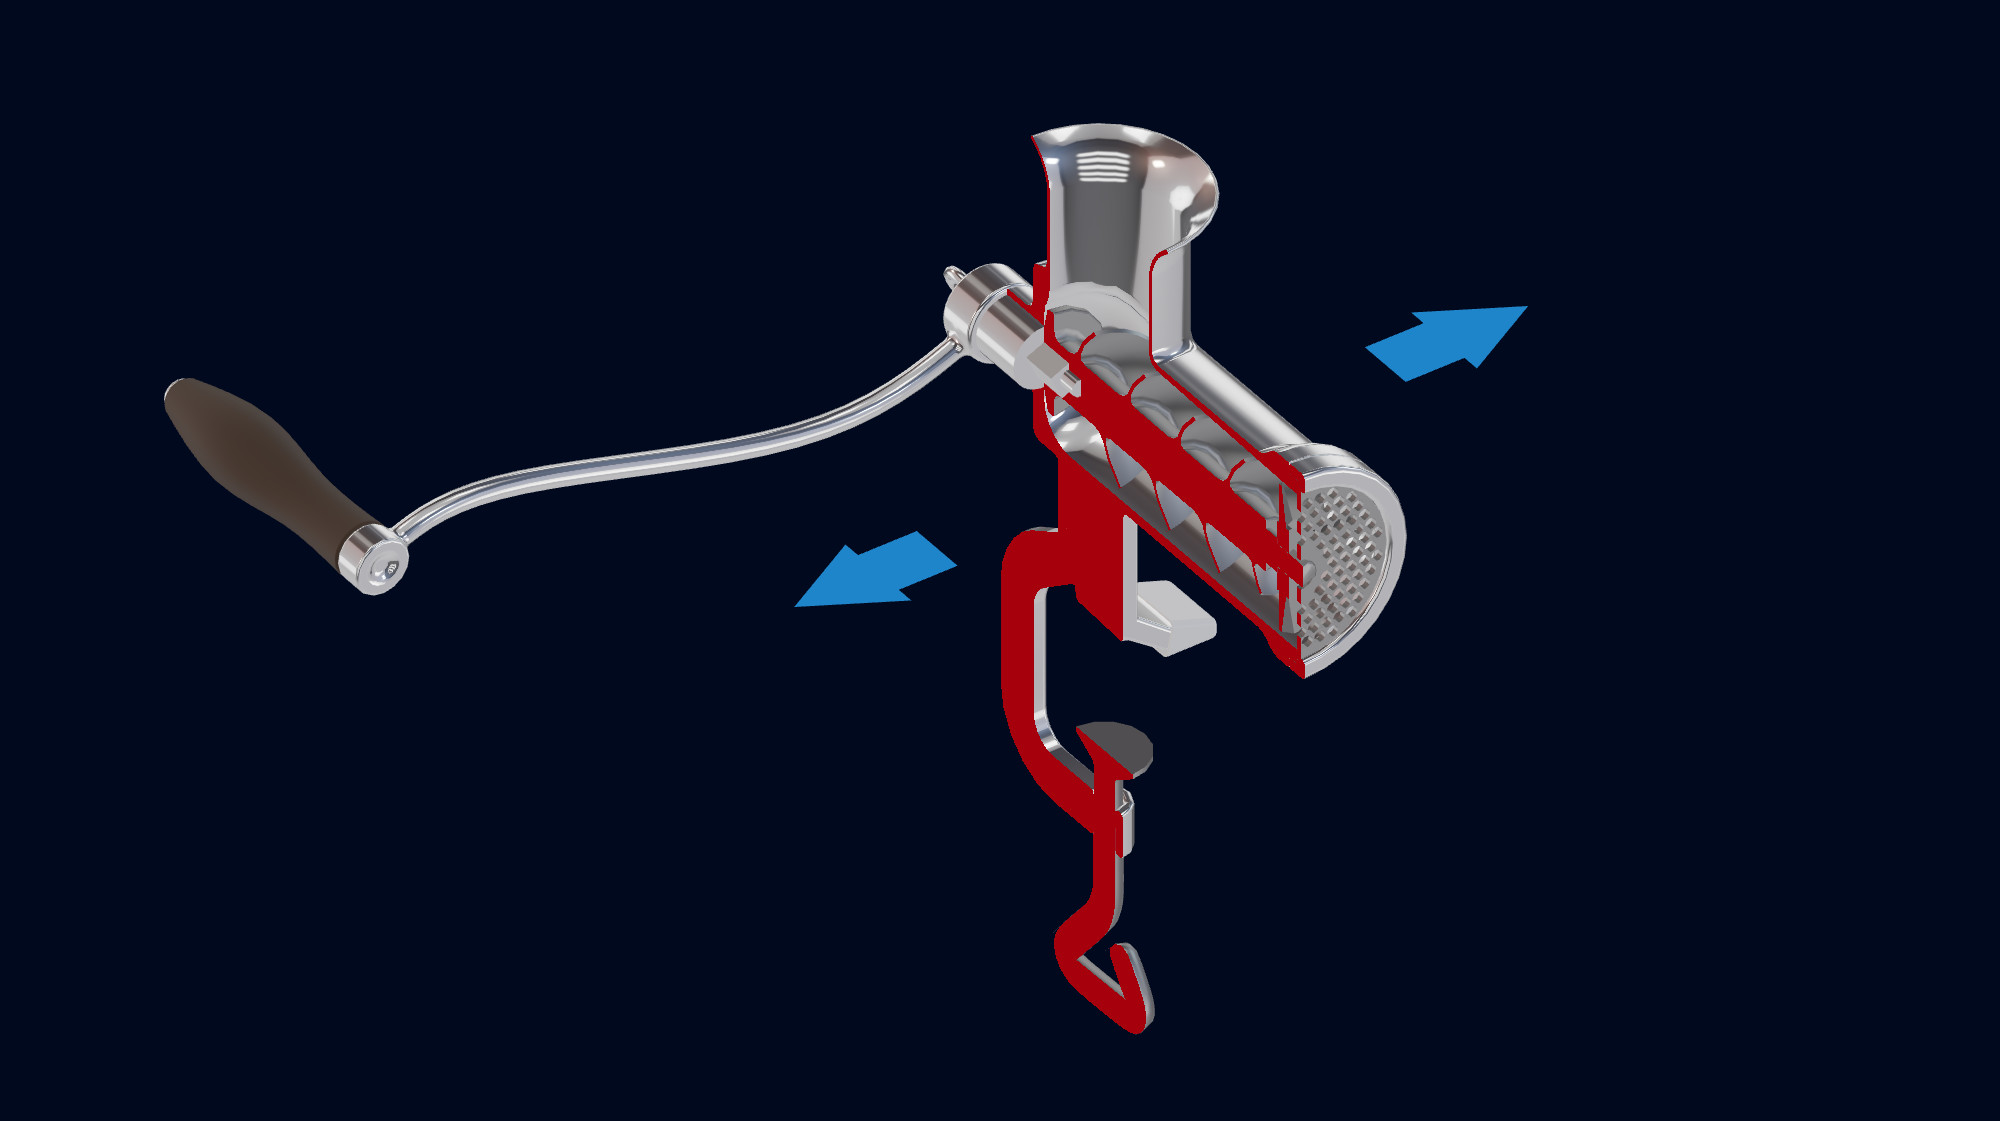 Clipping planes used to show the internals of a meat grinder